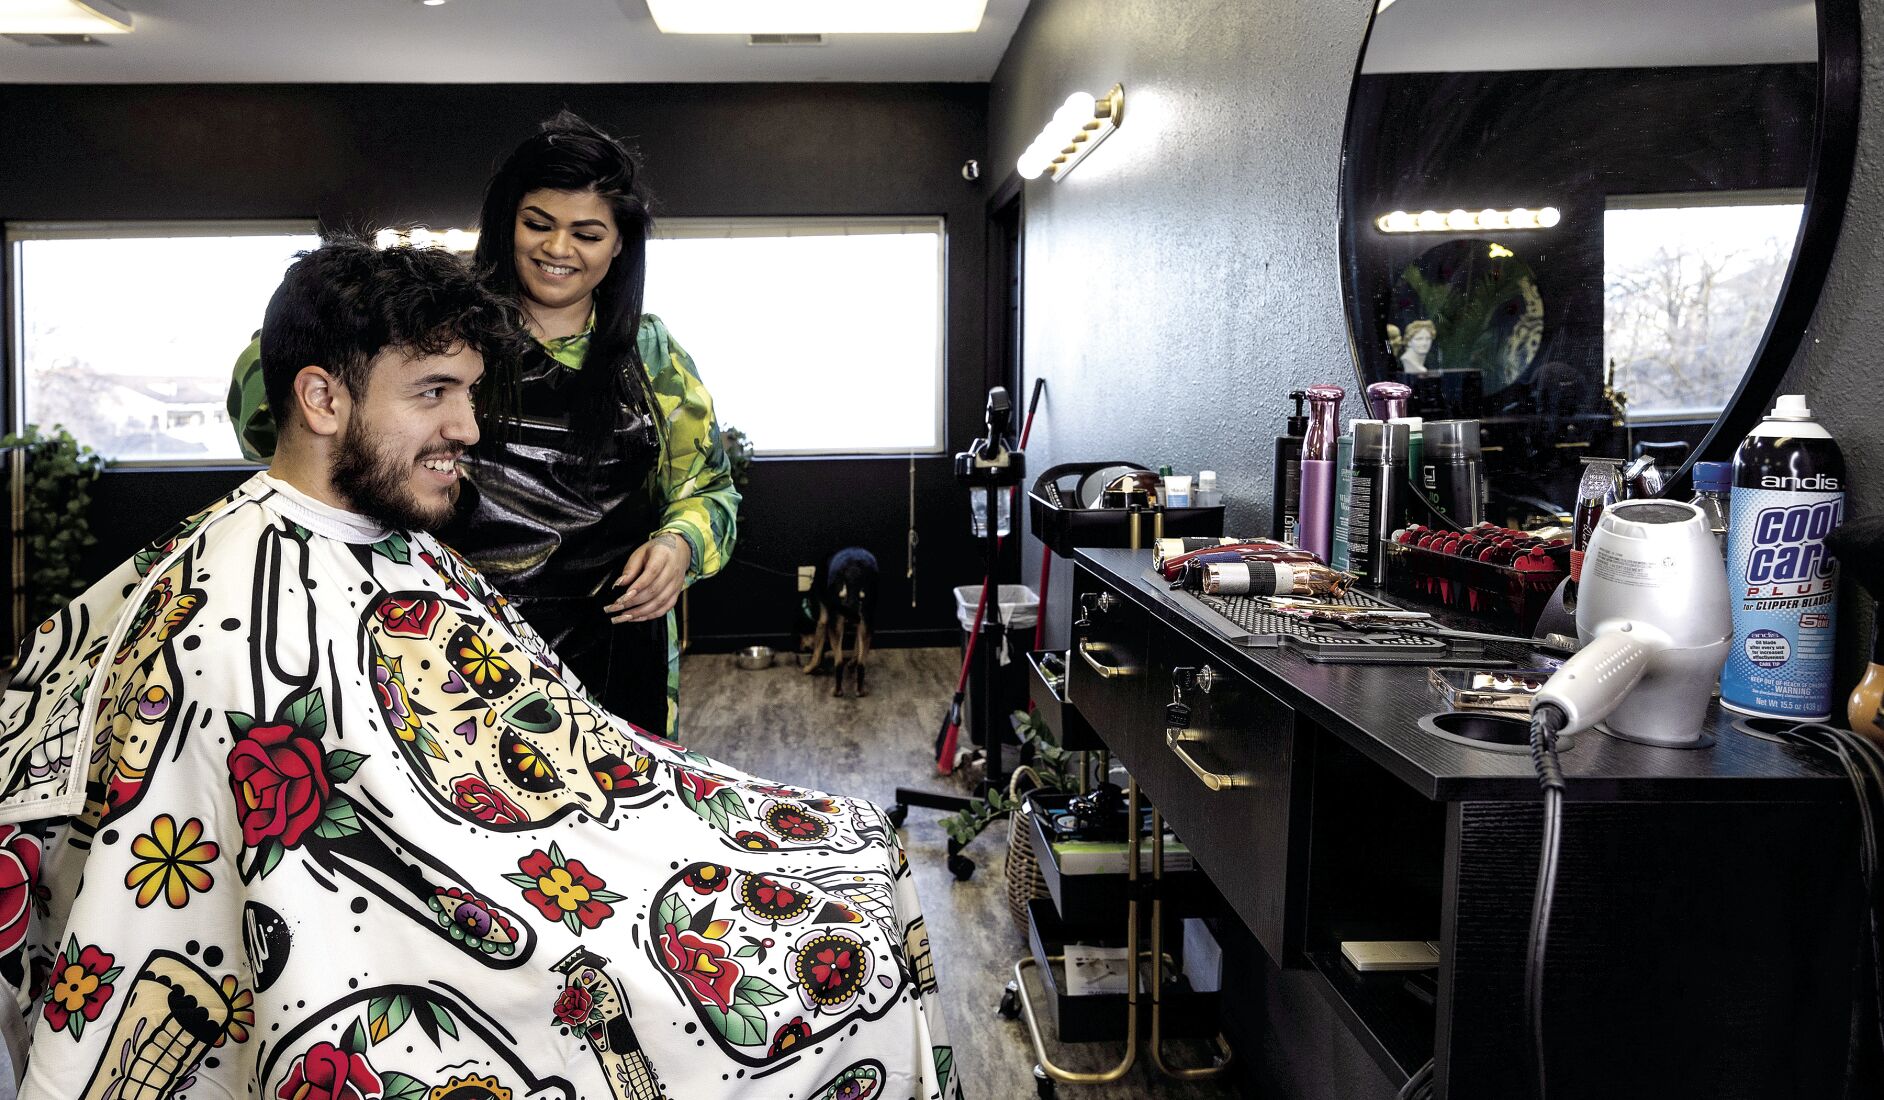 Owner Ana Neuhaus cuts Jose Cardenas’ hair at King Kutz, which opened in Dubuque in January.    PHOTO CREDIT: Stephen Gassman